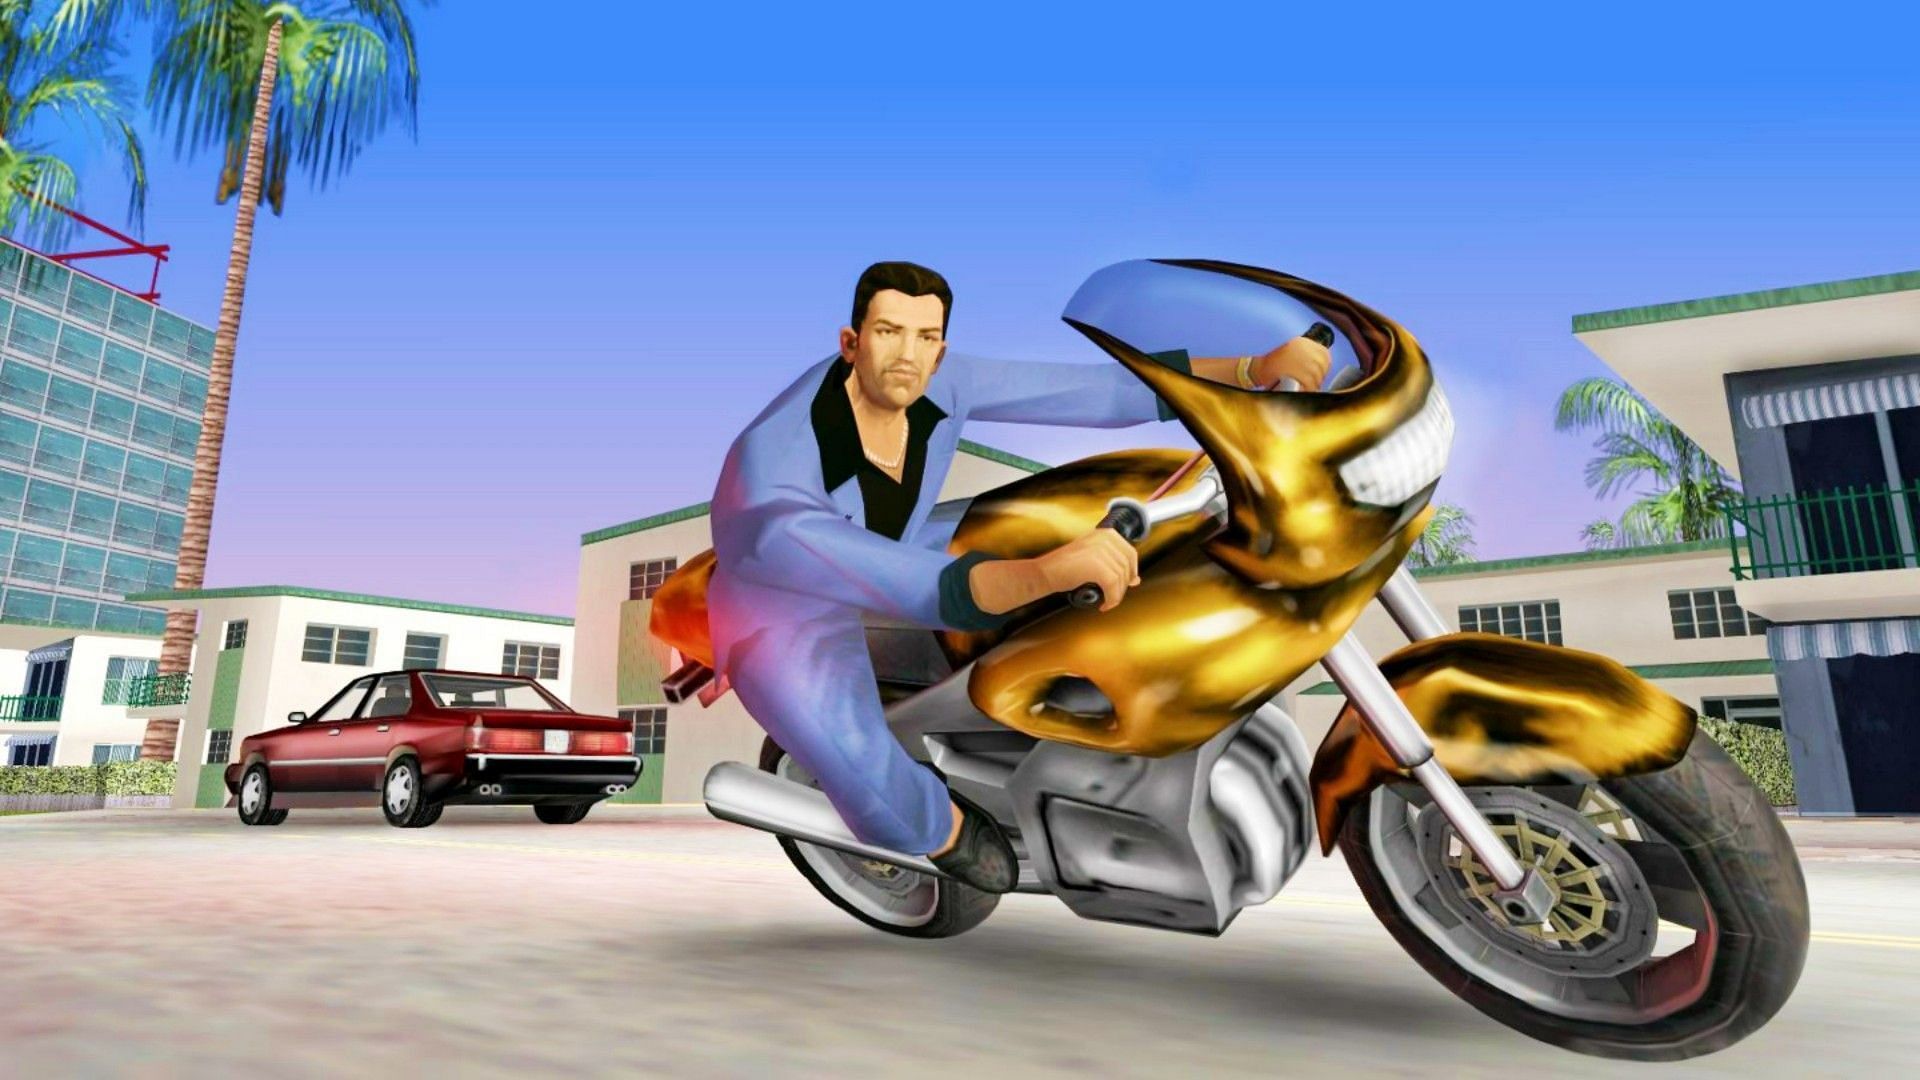 A voiced protagonist, motorcycles, and a new setting are just some of the changes introduced in this game to the series